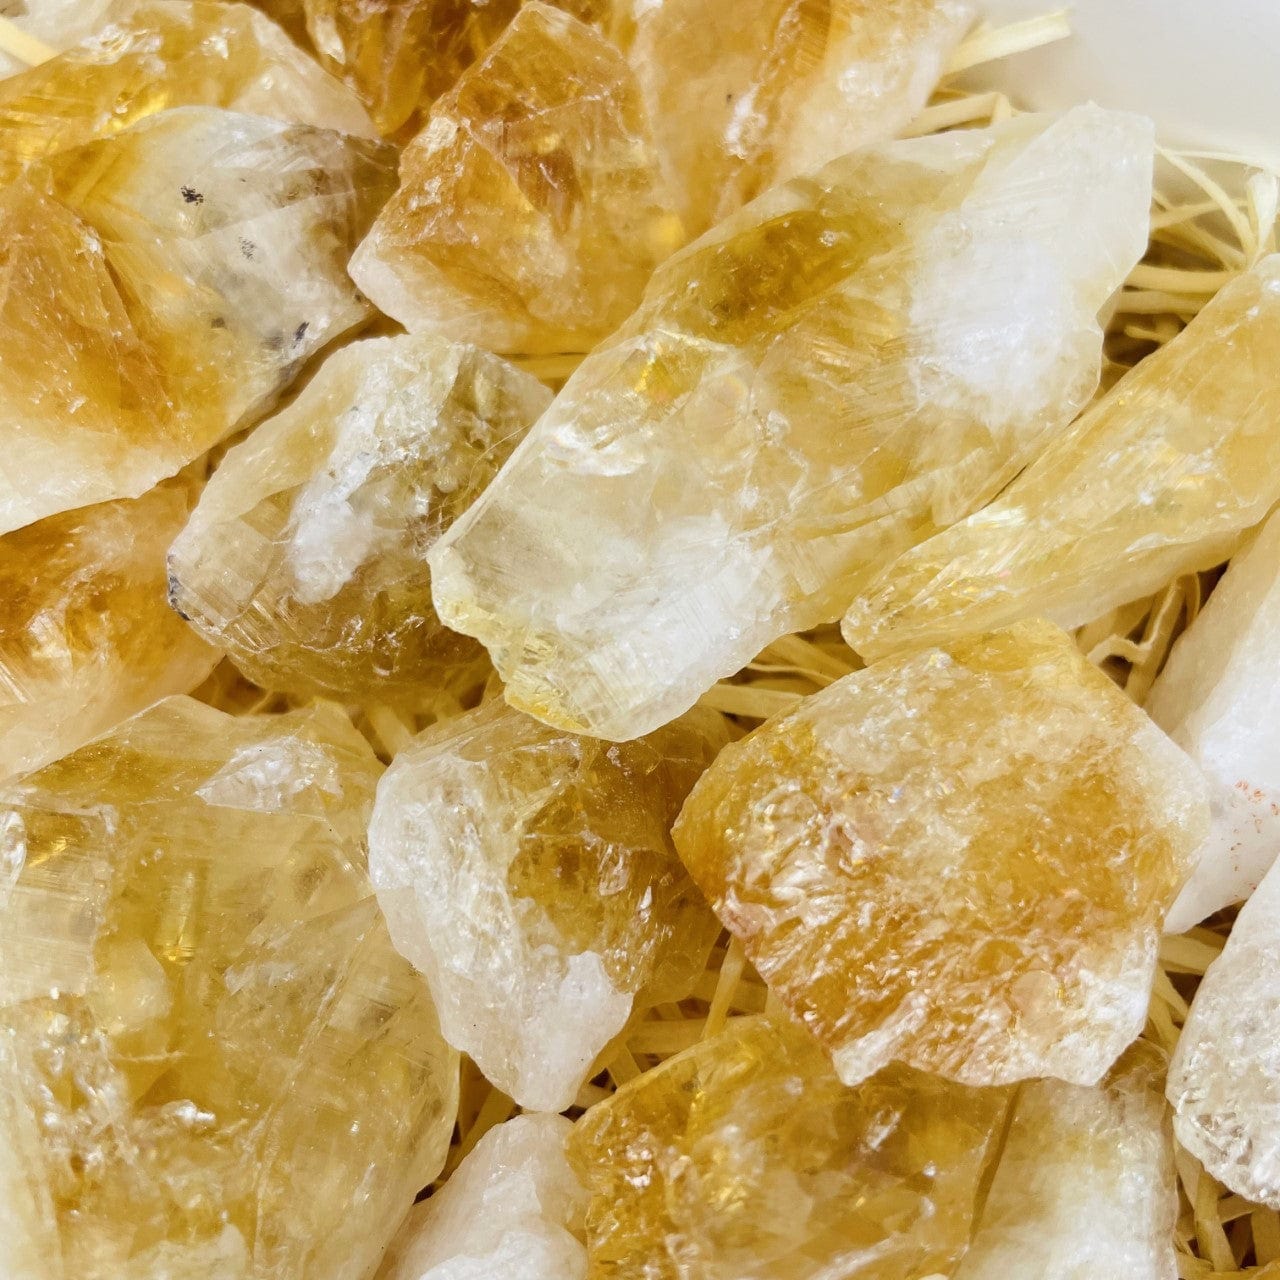 Rough Citrine close up to view texture and colors